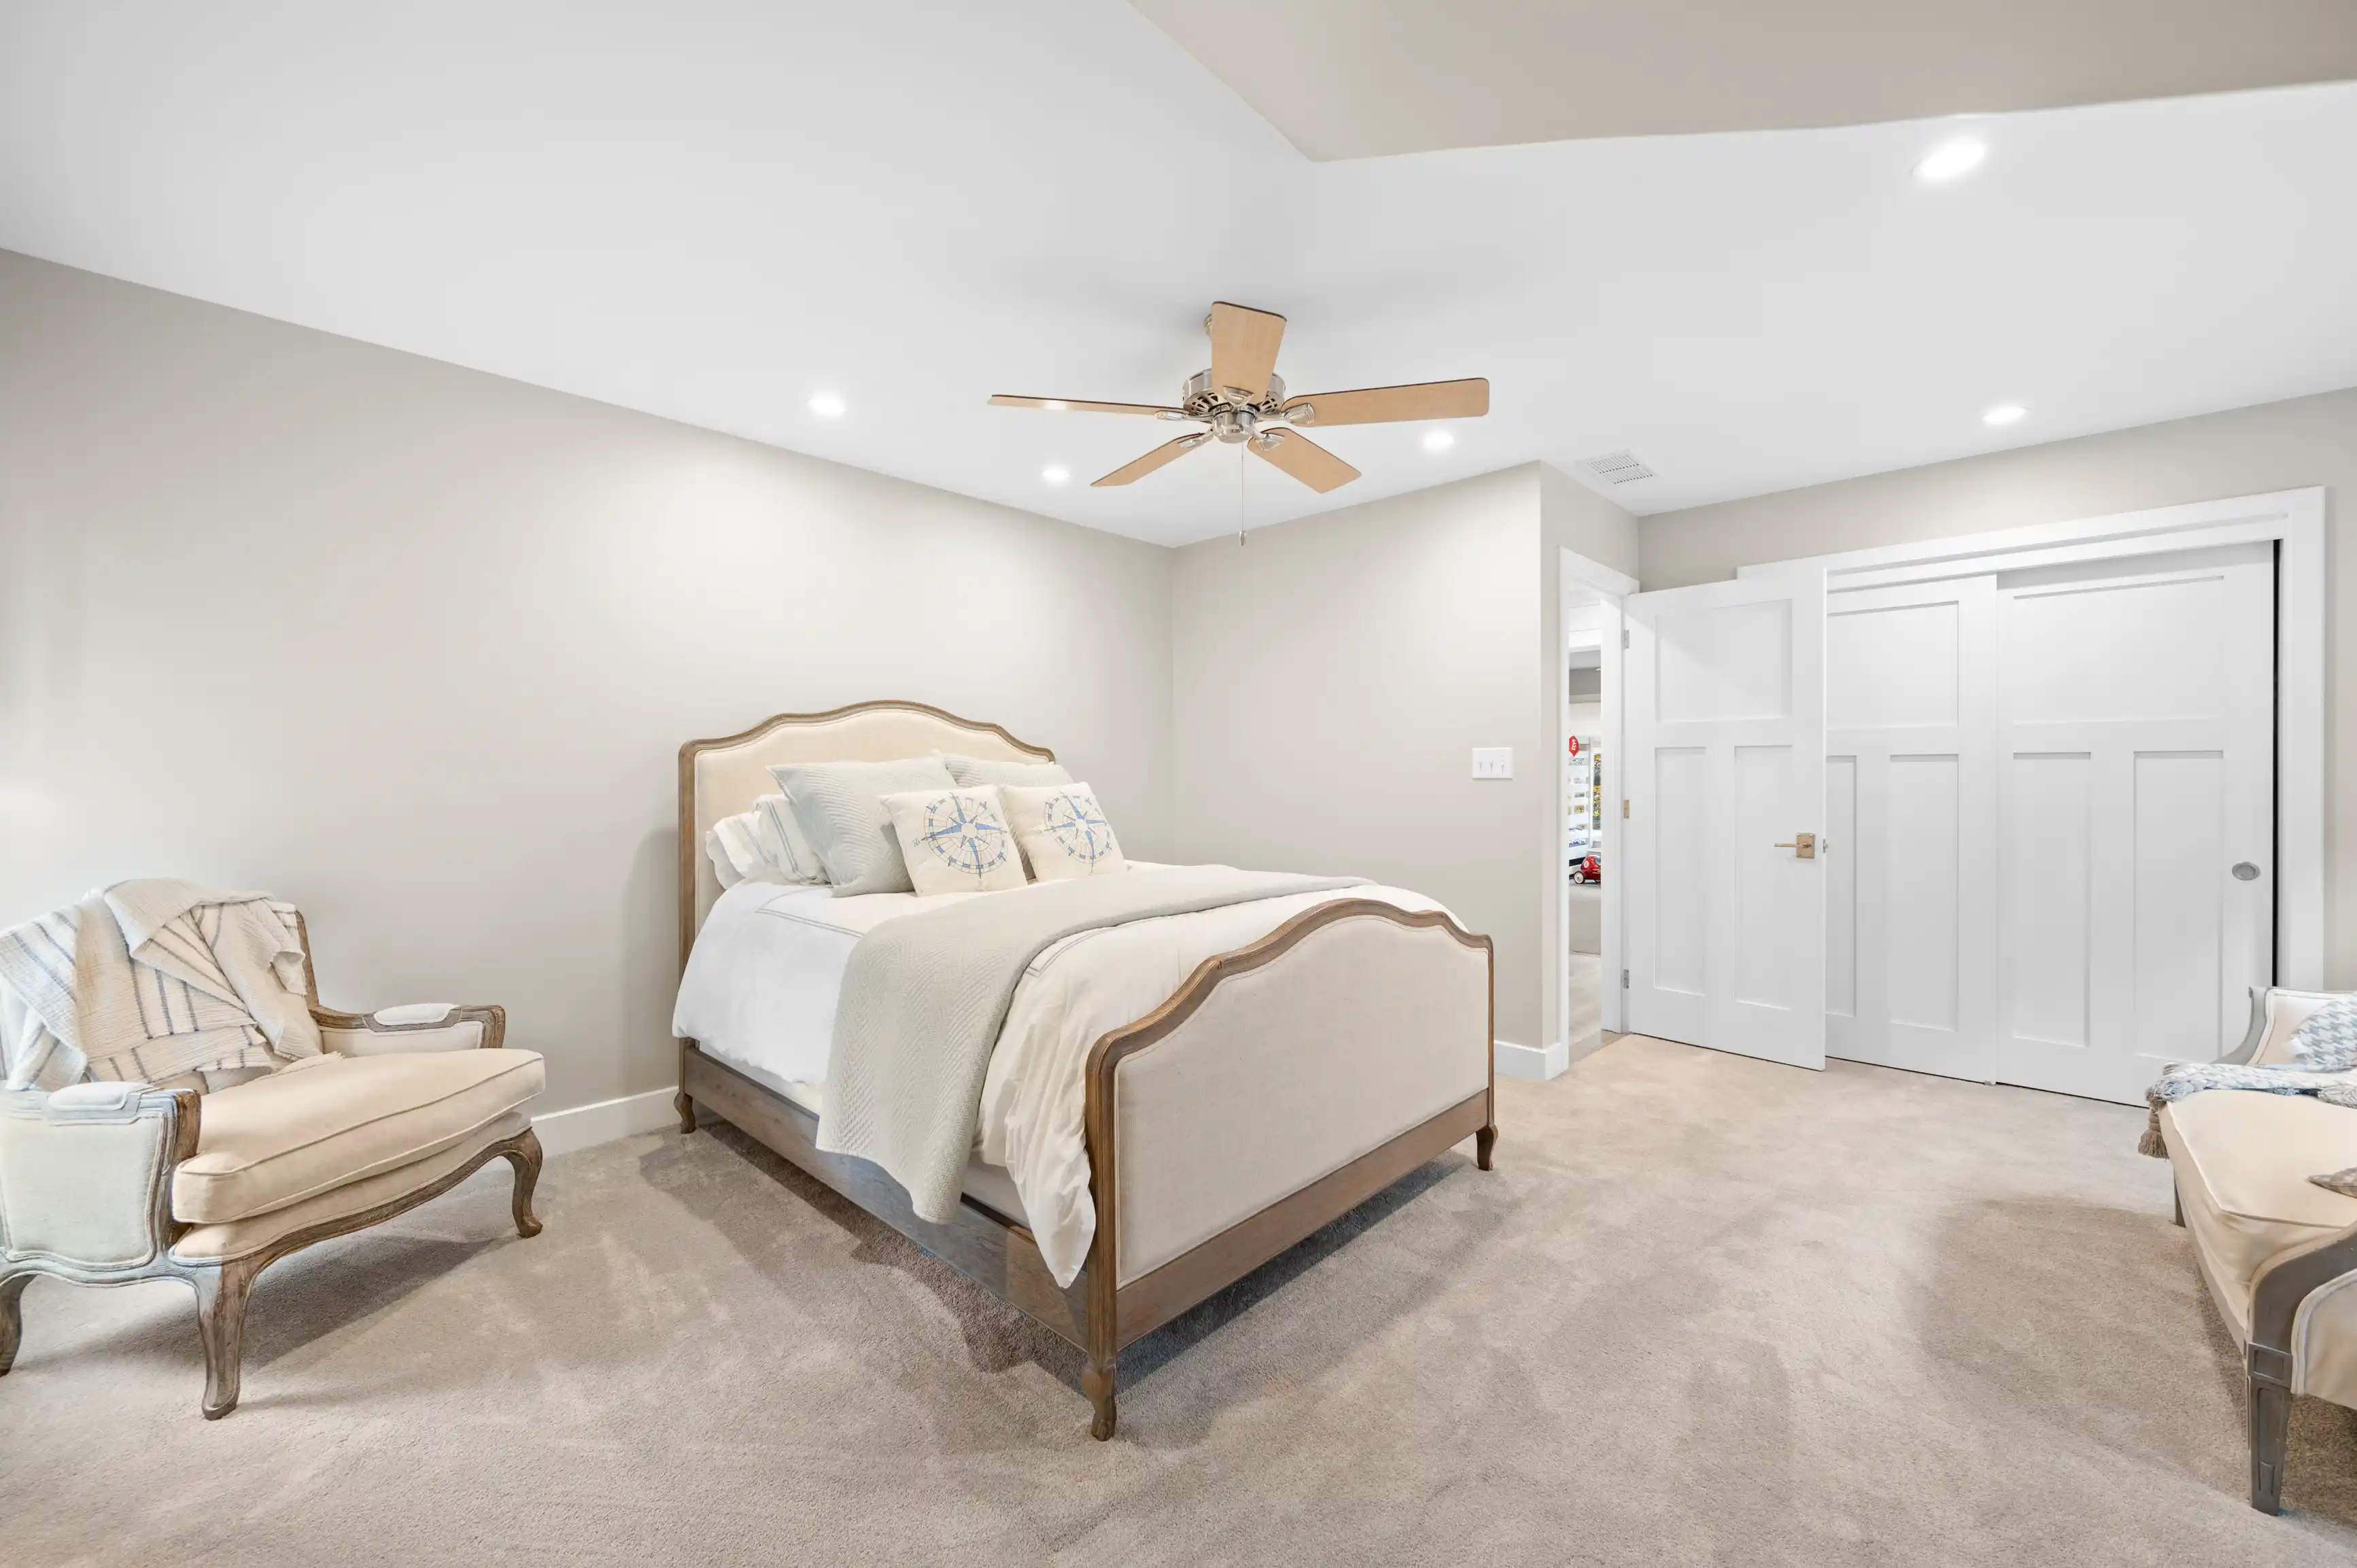 A spacious and well-lit bedroom with a beige upholstered bed, two matching armchairs, a ceiling fan, and a white double door closet.